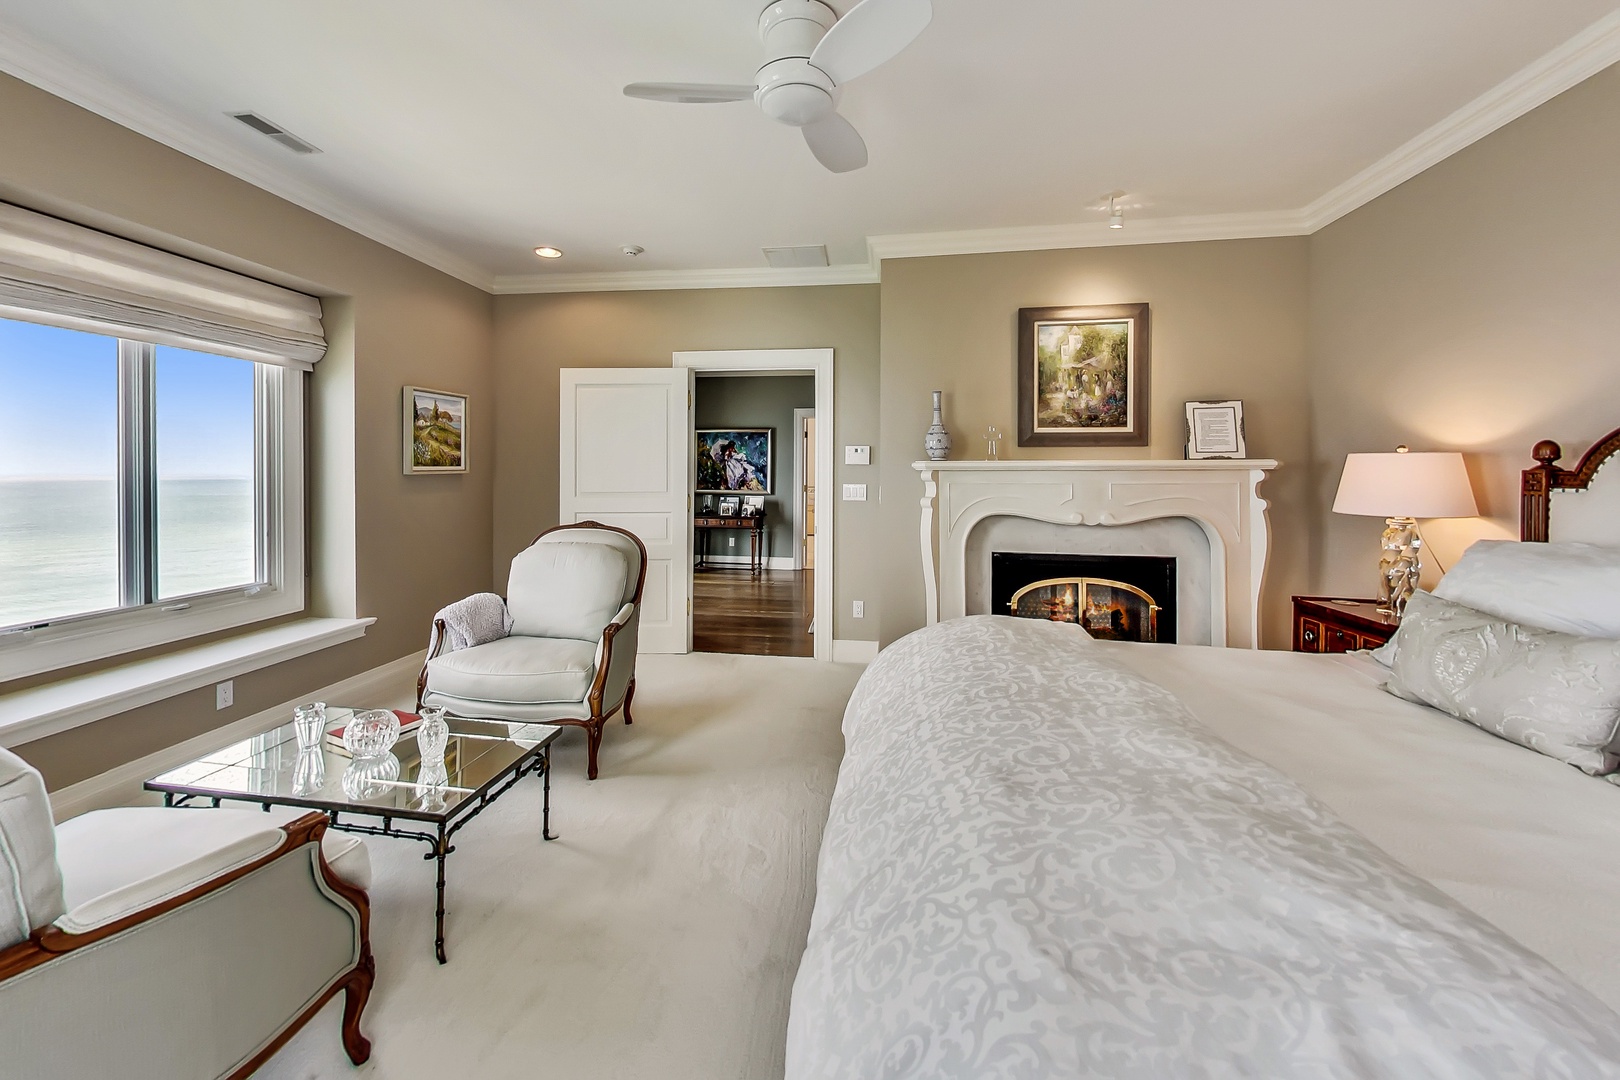 A Master Bedroom fit for Royalty - with a toasty fireplace and fabulous view.